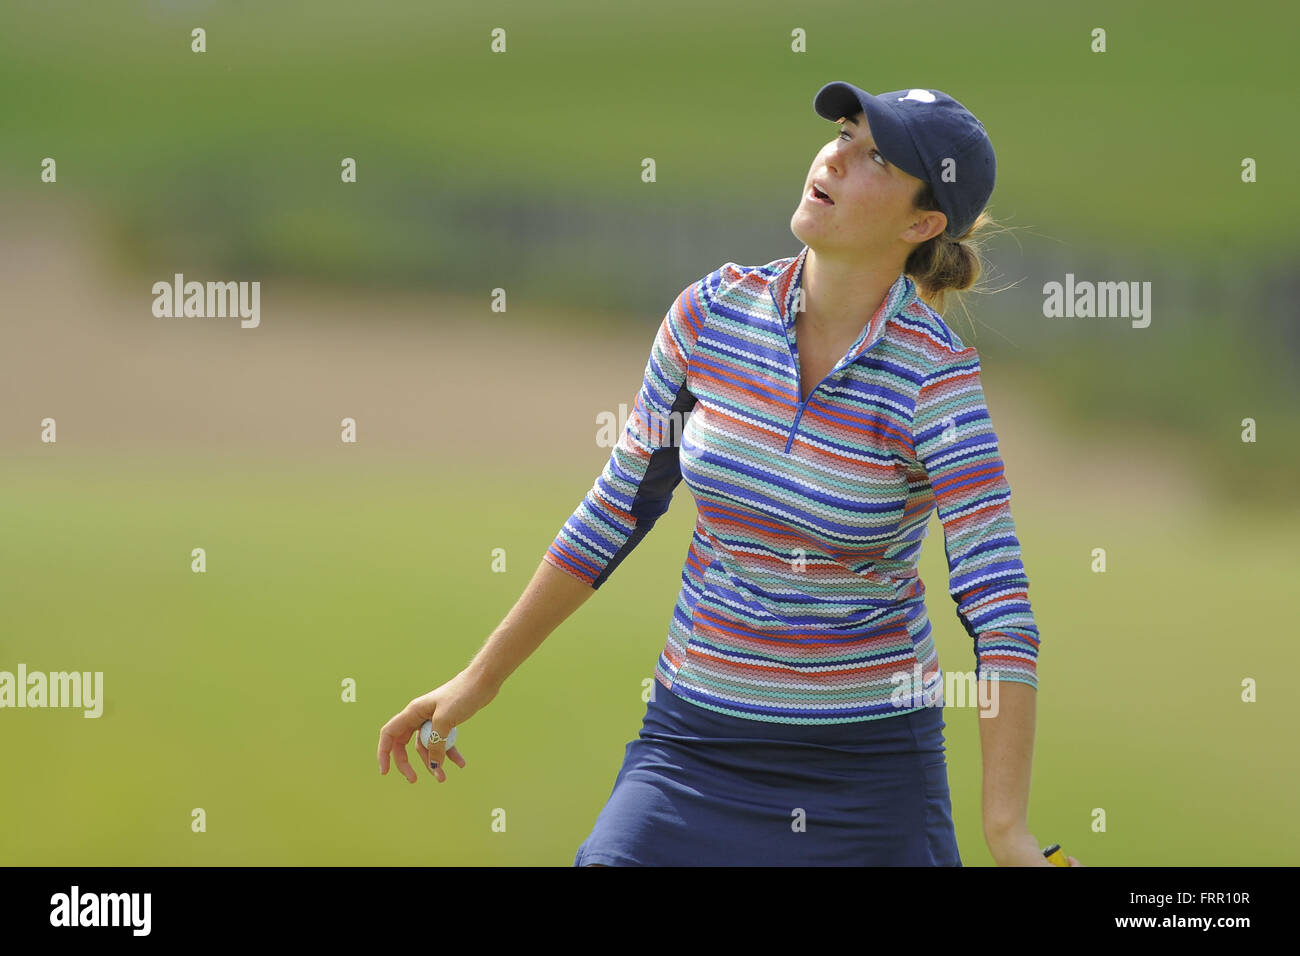 Kissimmee, FL, USA. 21st Sep, 2013. Jaye Marie Green during the second round of the Symetra Tour's Volvik Championship on the Plamer Course at Reunion Resort on Sept. 21, 2013 in Kissimmee, Florida. ZUMA Press/Scott A. Miller © Scott A. Miller/ZUMA Wire/Alamy Live News Stock Photo